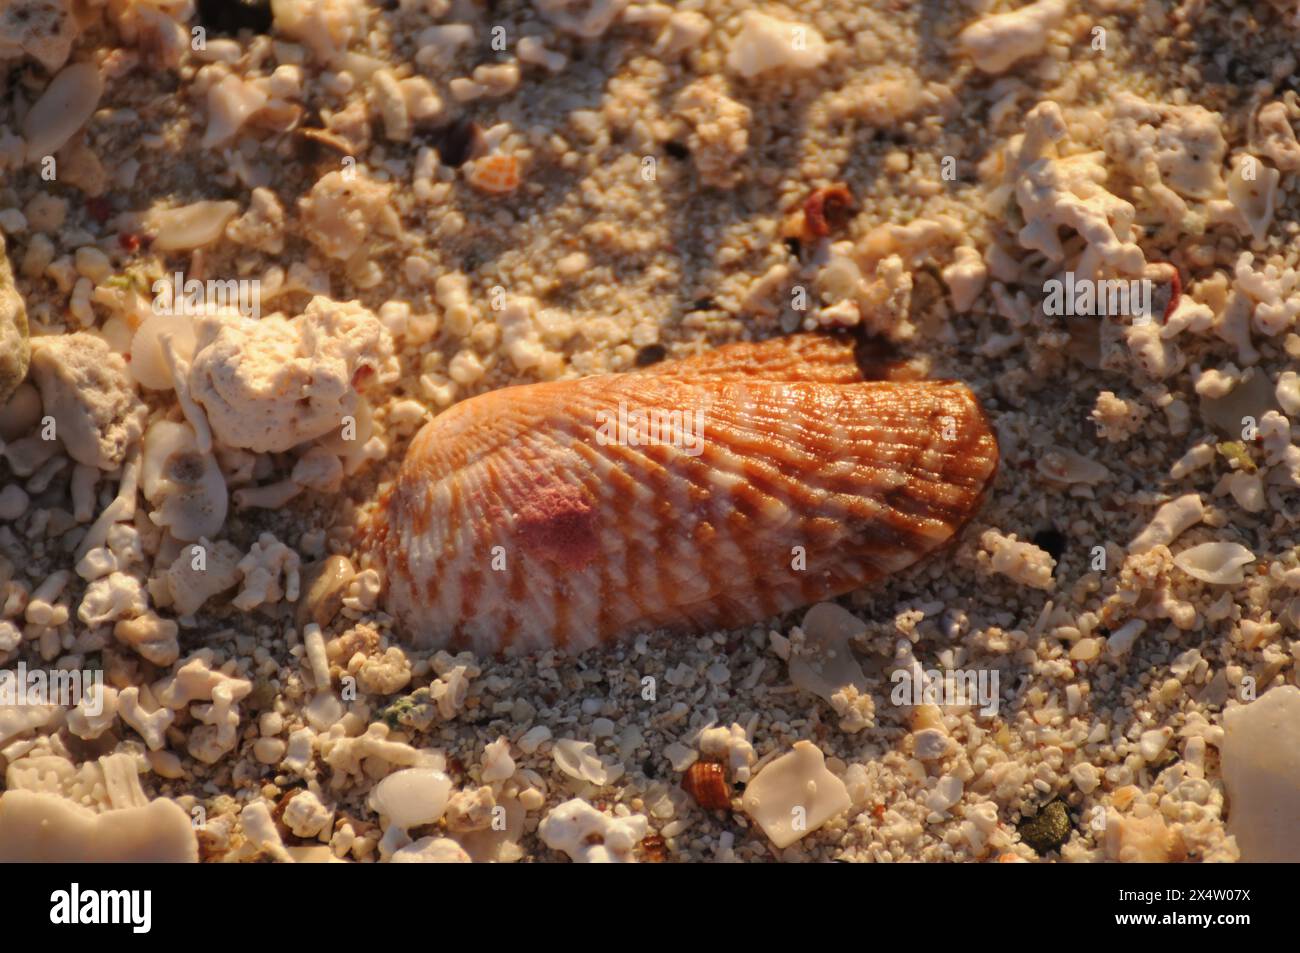 A small shell is laying on the sand. The shell is tan and has a pink spot on it. The sand is white and the shell is the only object visible in the ima Stock Photo